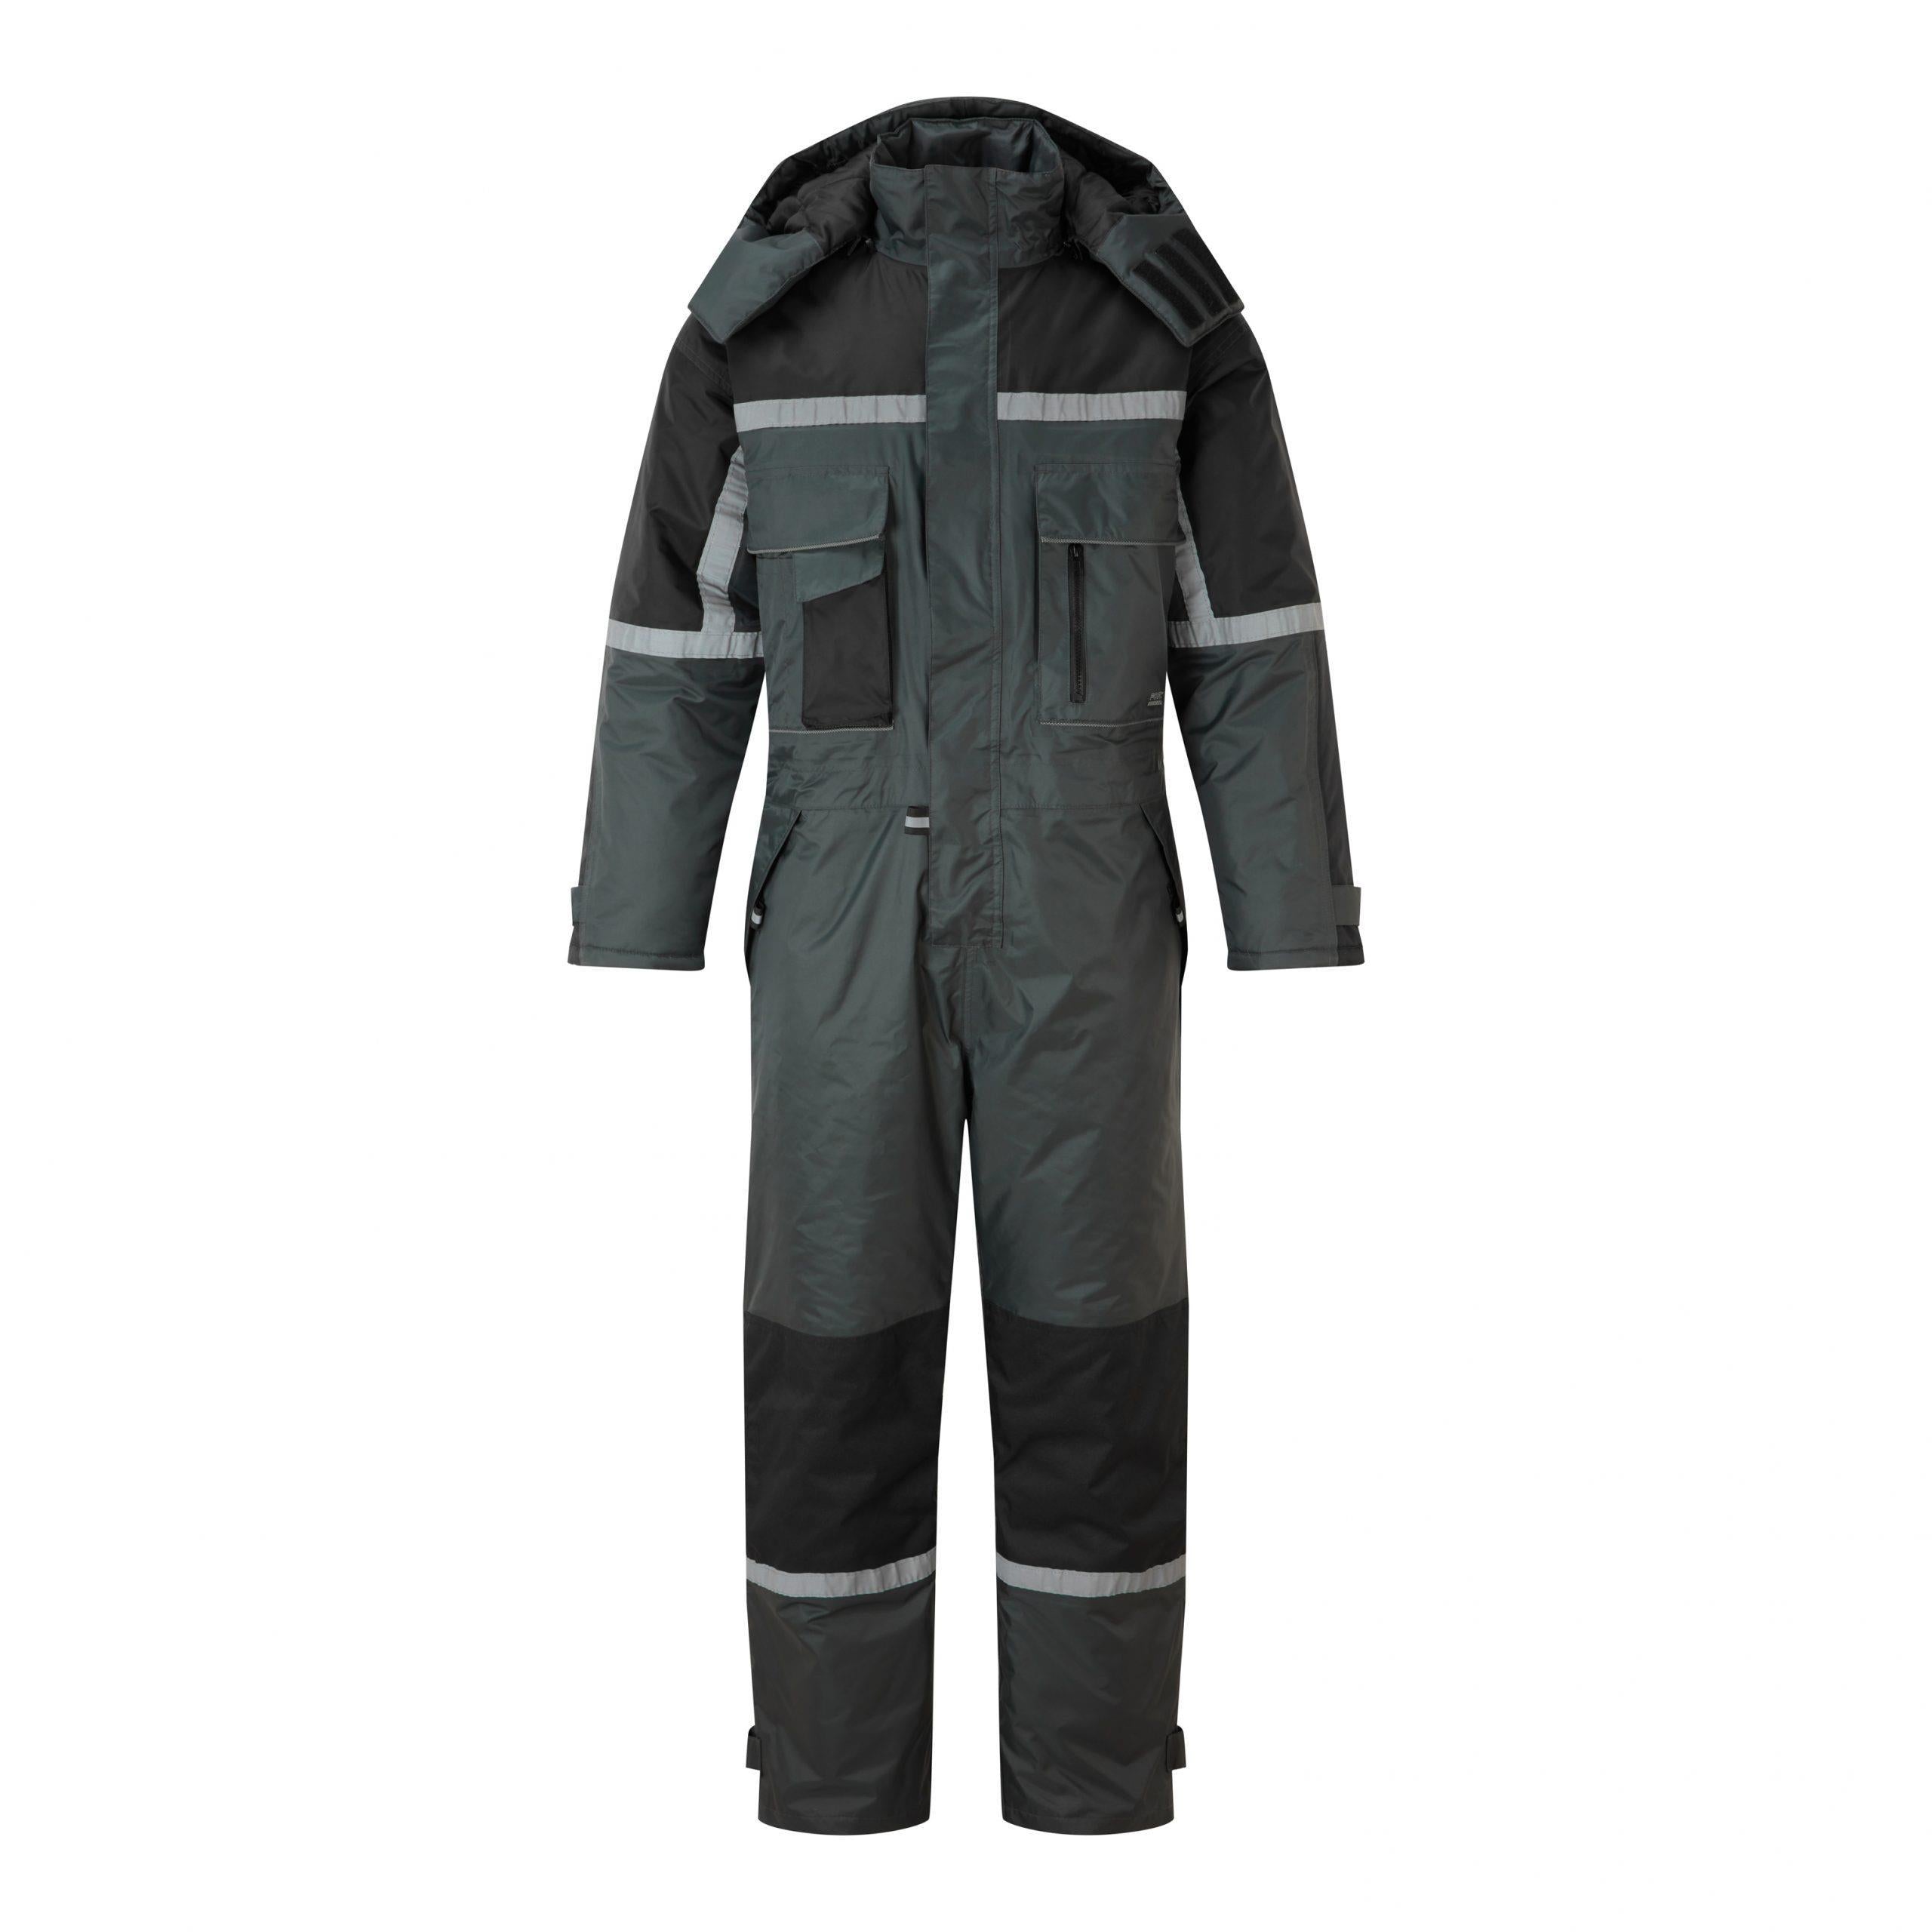 Fort Orwell waterproof padded lined hooded reflective winter coverall #325